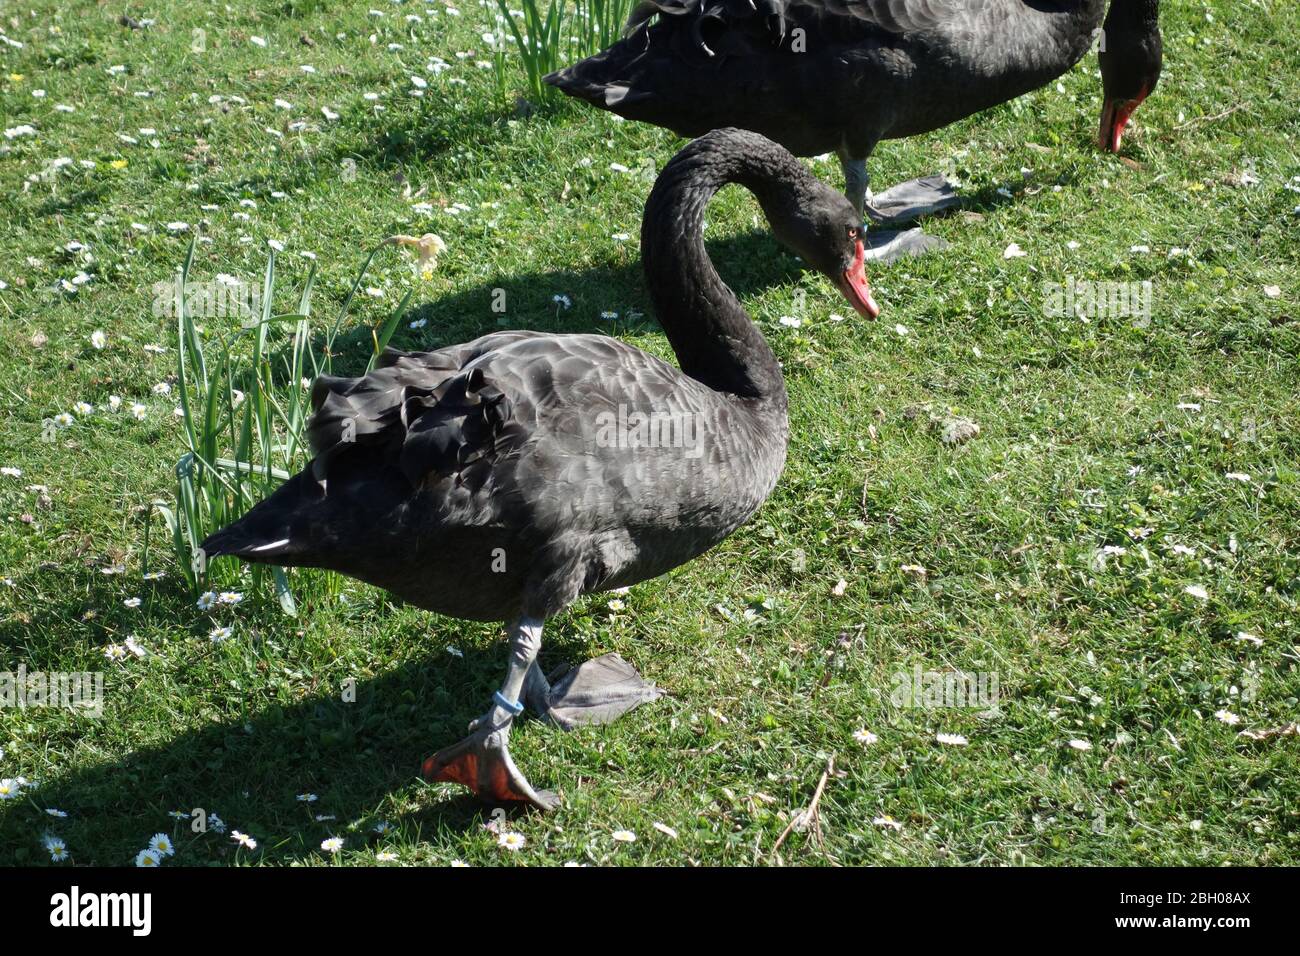 Gahlen, Deutschland. 09th Apr, Black Swan on the Meadow, the Black Black Swan, Latin Cygnus Atratus, in the exchange trading, the Black Swan is used after the definition by Nassim